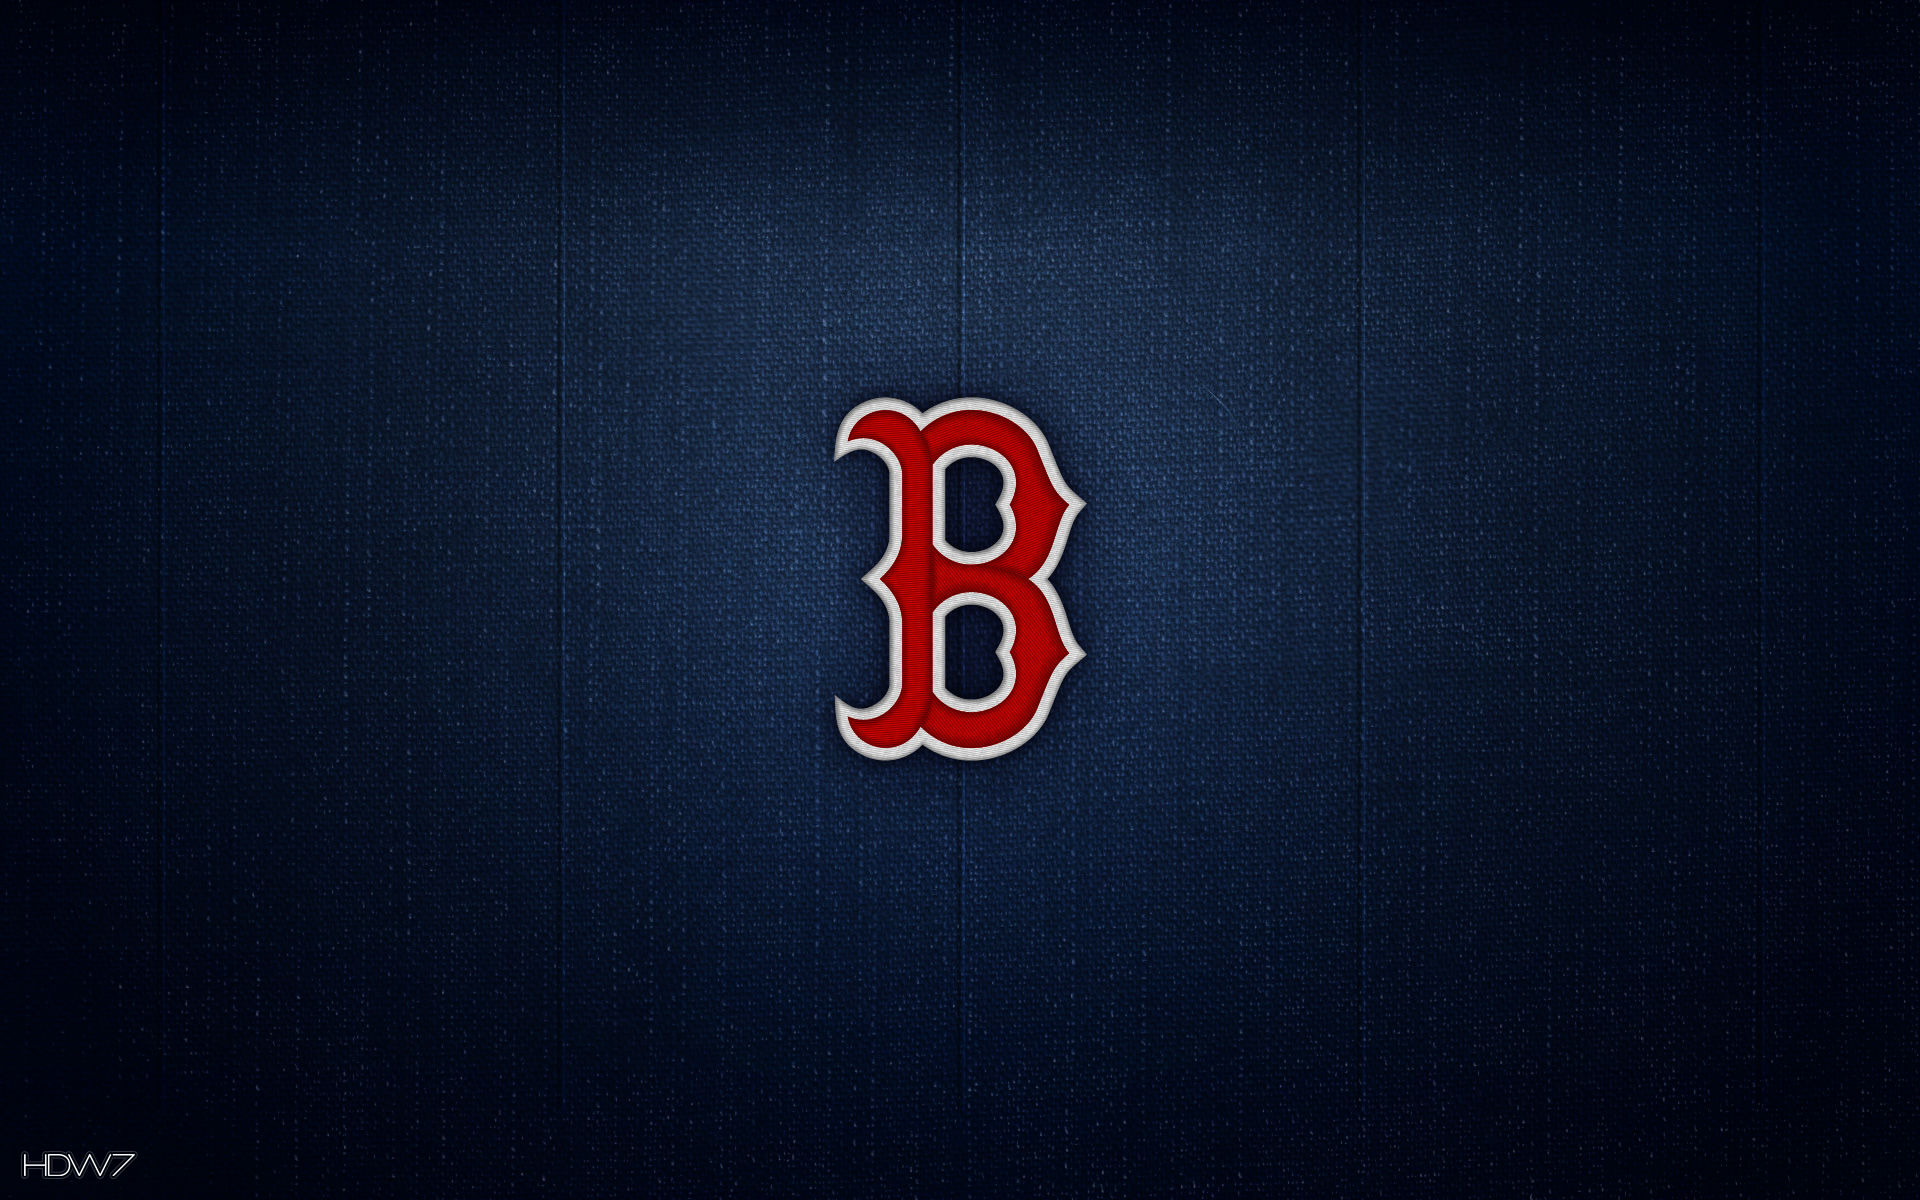 red sox wallpaper 1920x1080 wallpapers